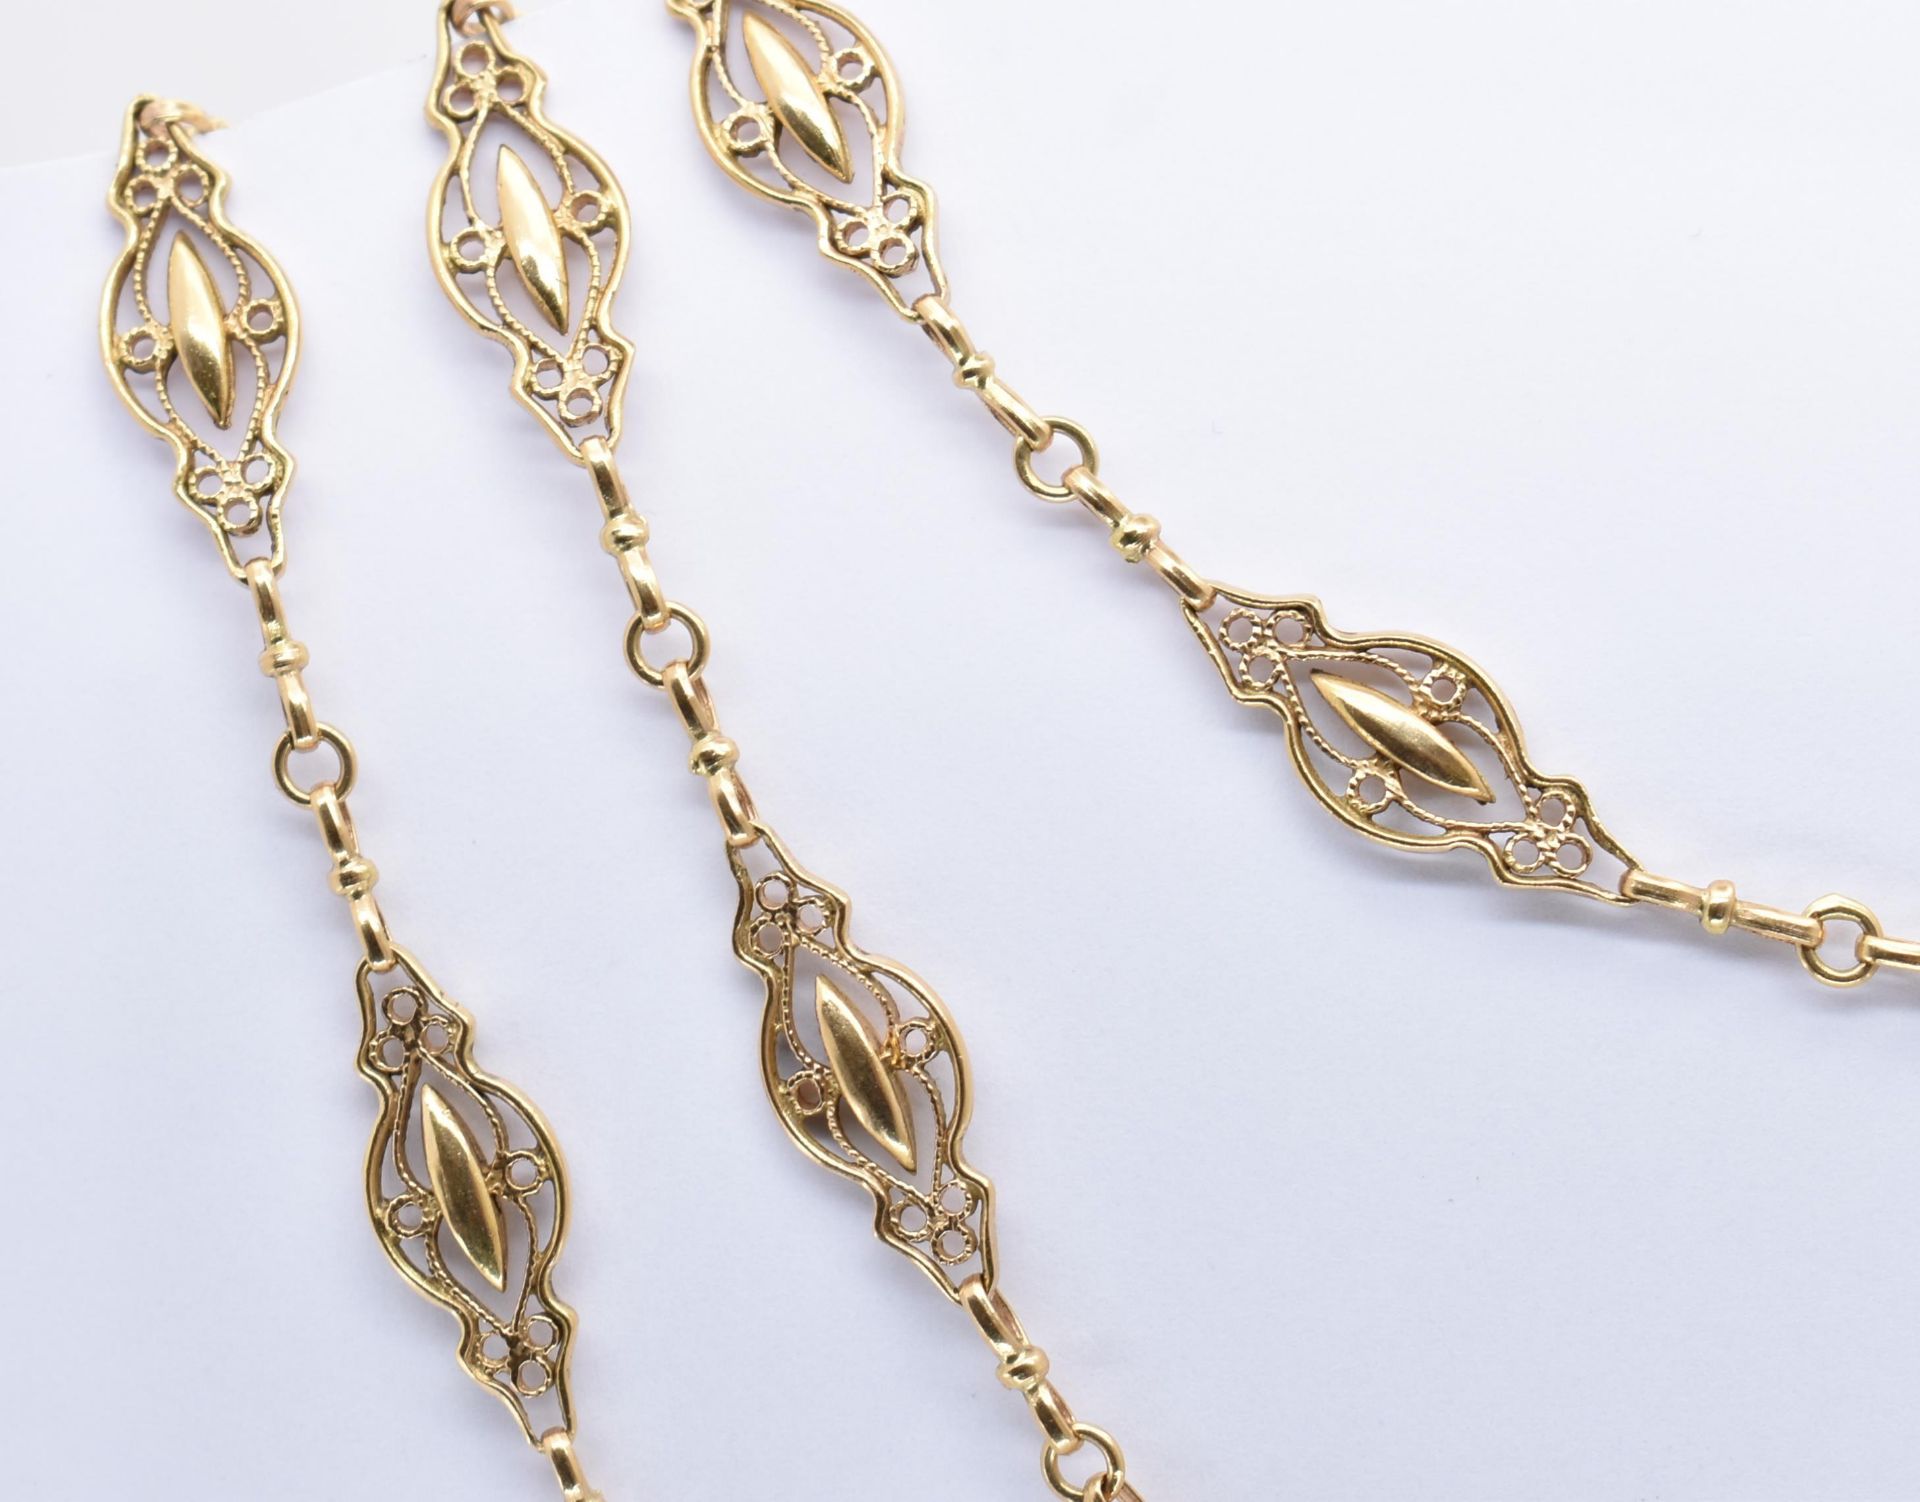 FRENCH 18CT GOLD LONG GUARD CHAIN NECKLACE - Image 2 of 4